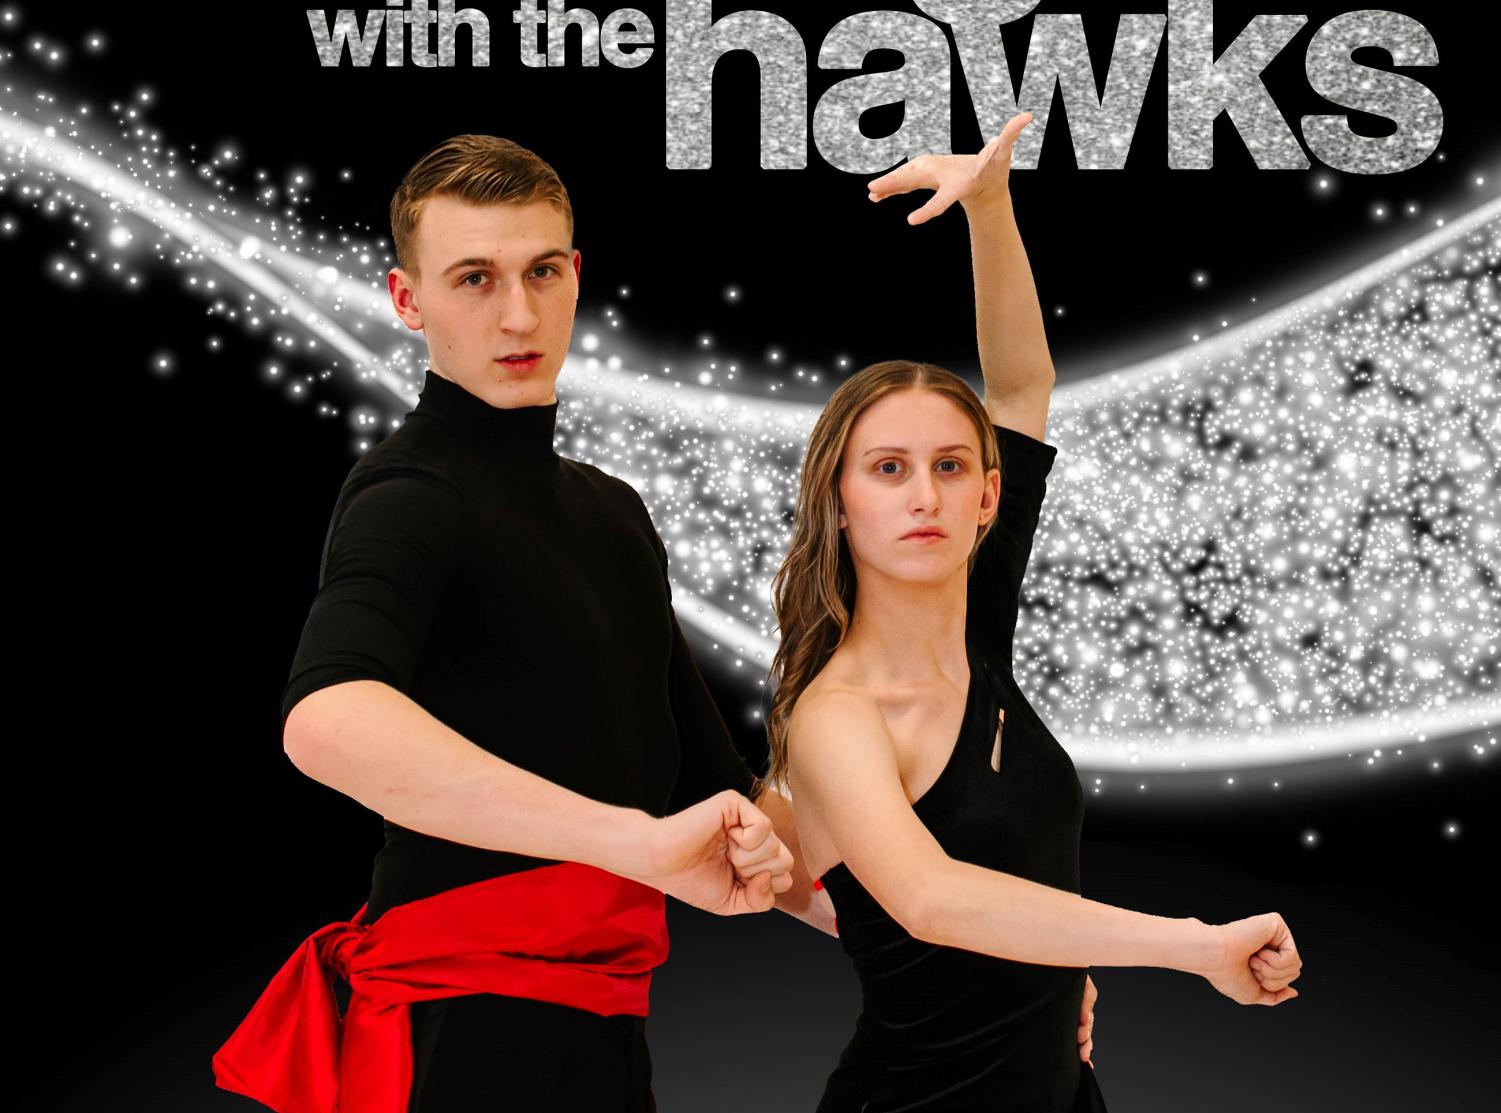 Dancing+With+The+Hawks+2022